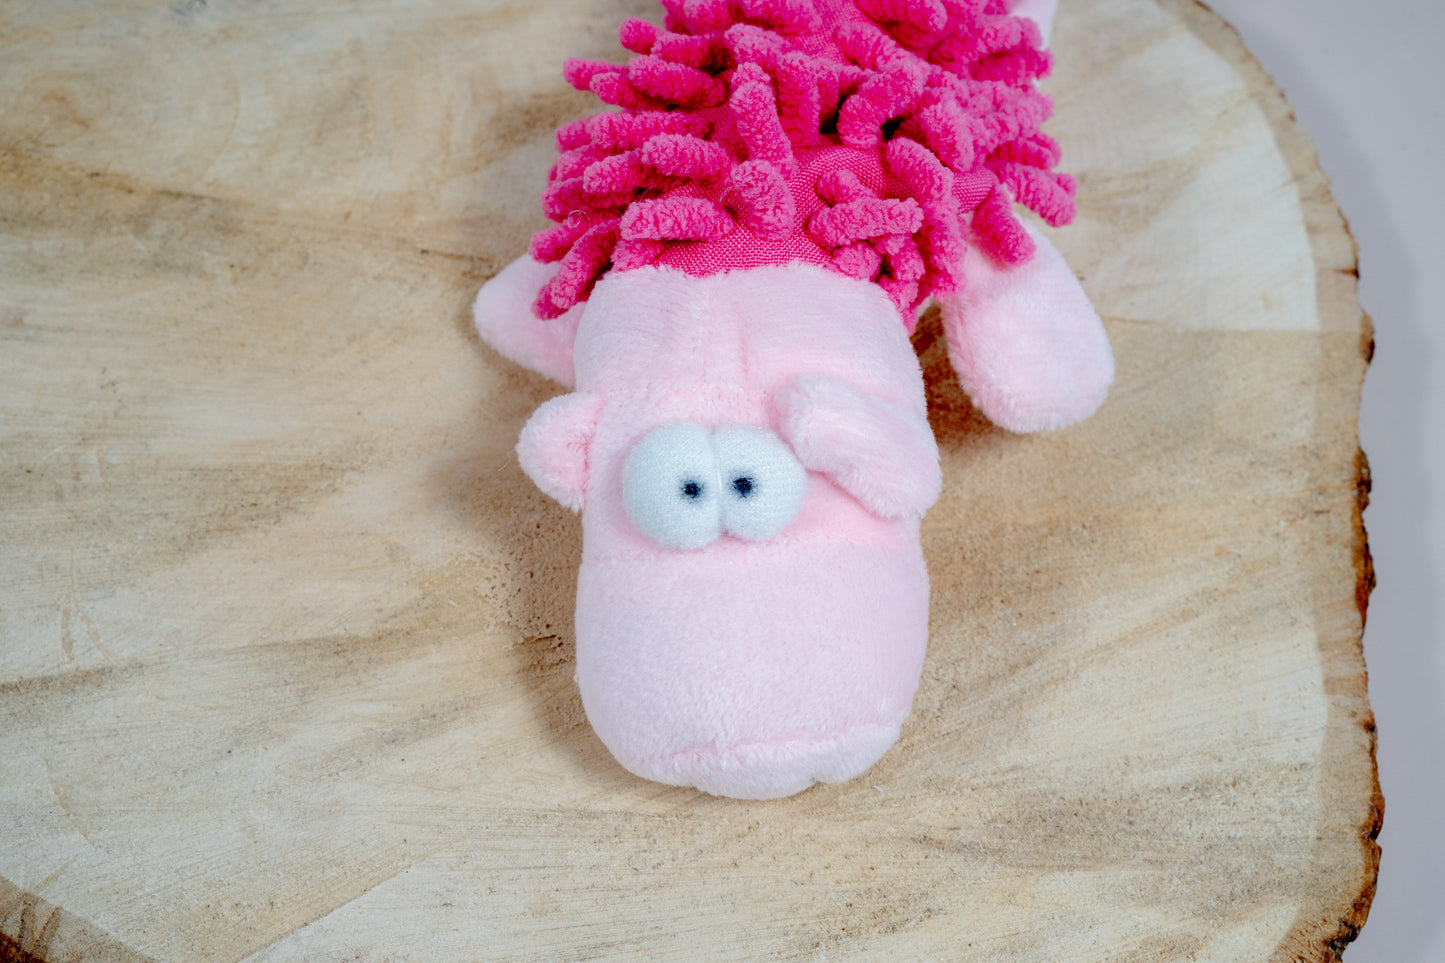 Front view of the squeaky soft plush for dogs.